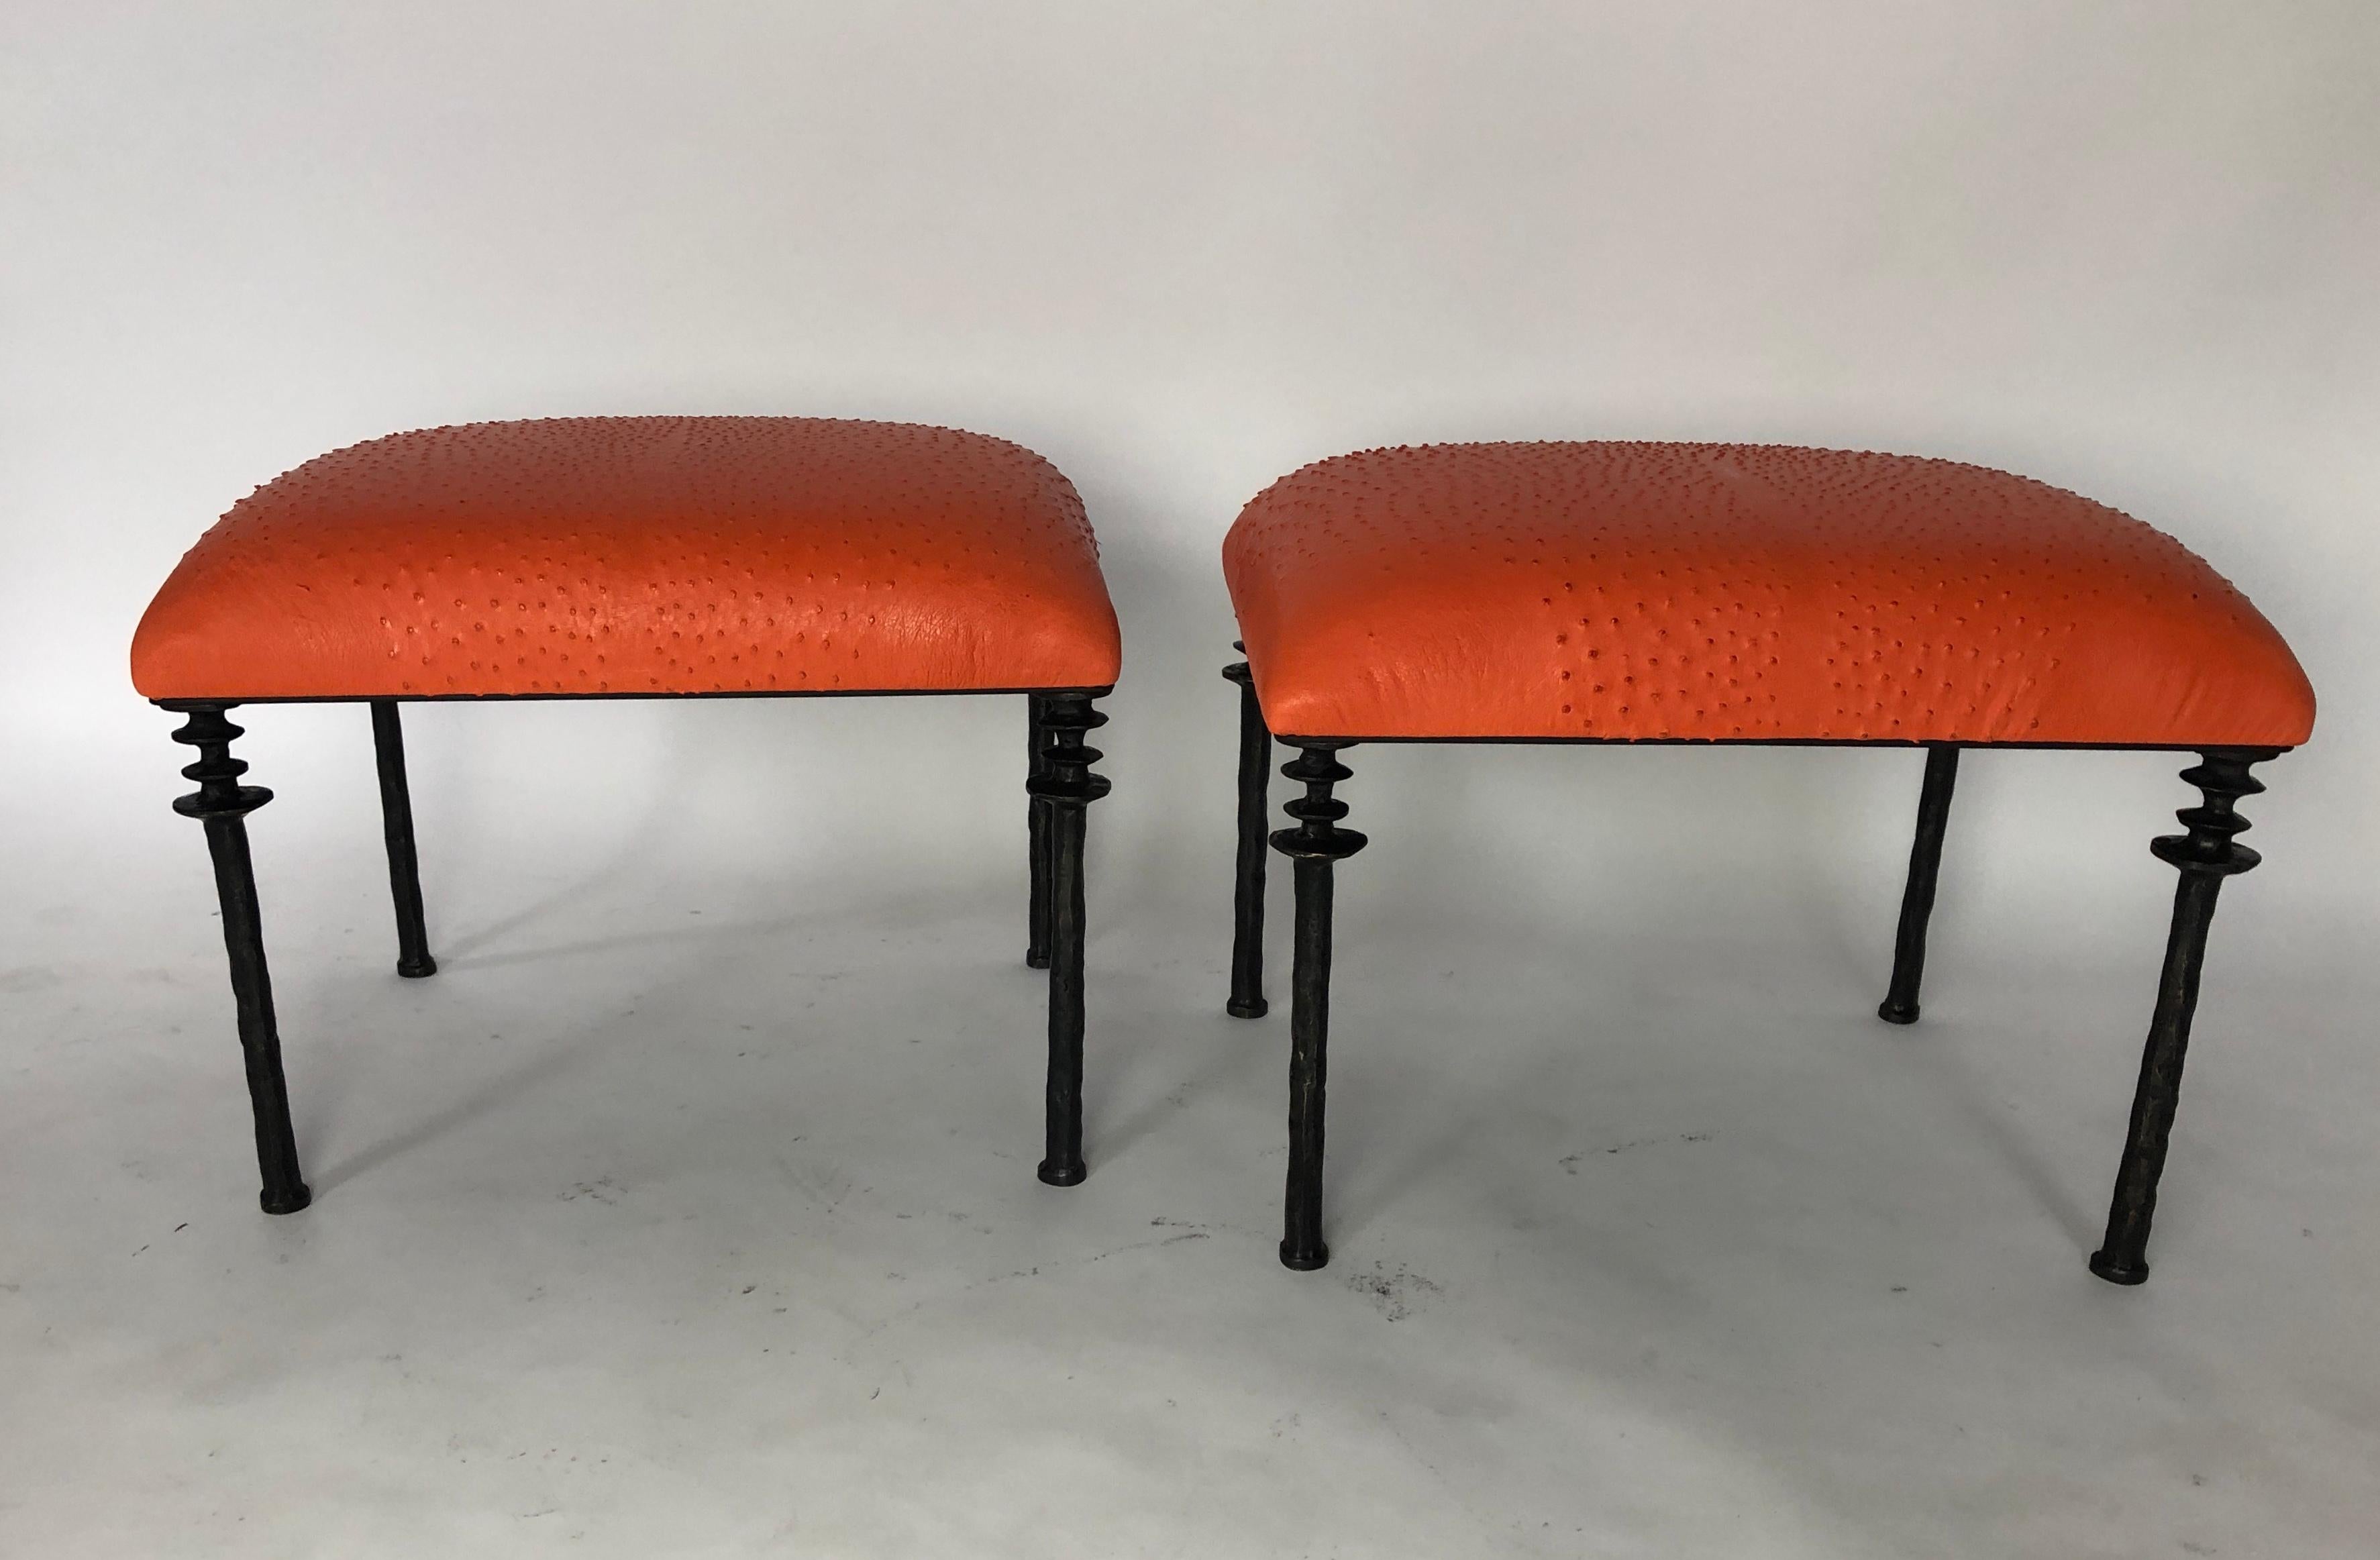 Organic Modern Pair of Sorgue Stools, by Bourgeois Boheme Atelier, Tangerine Ostrich Leather